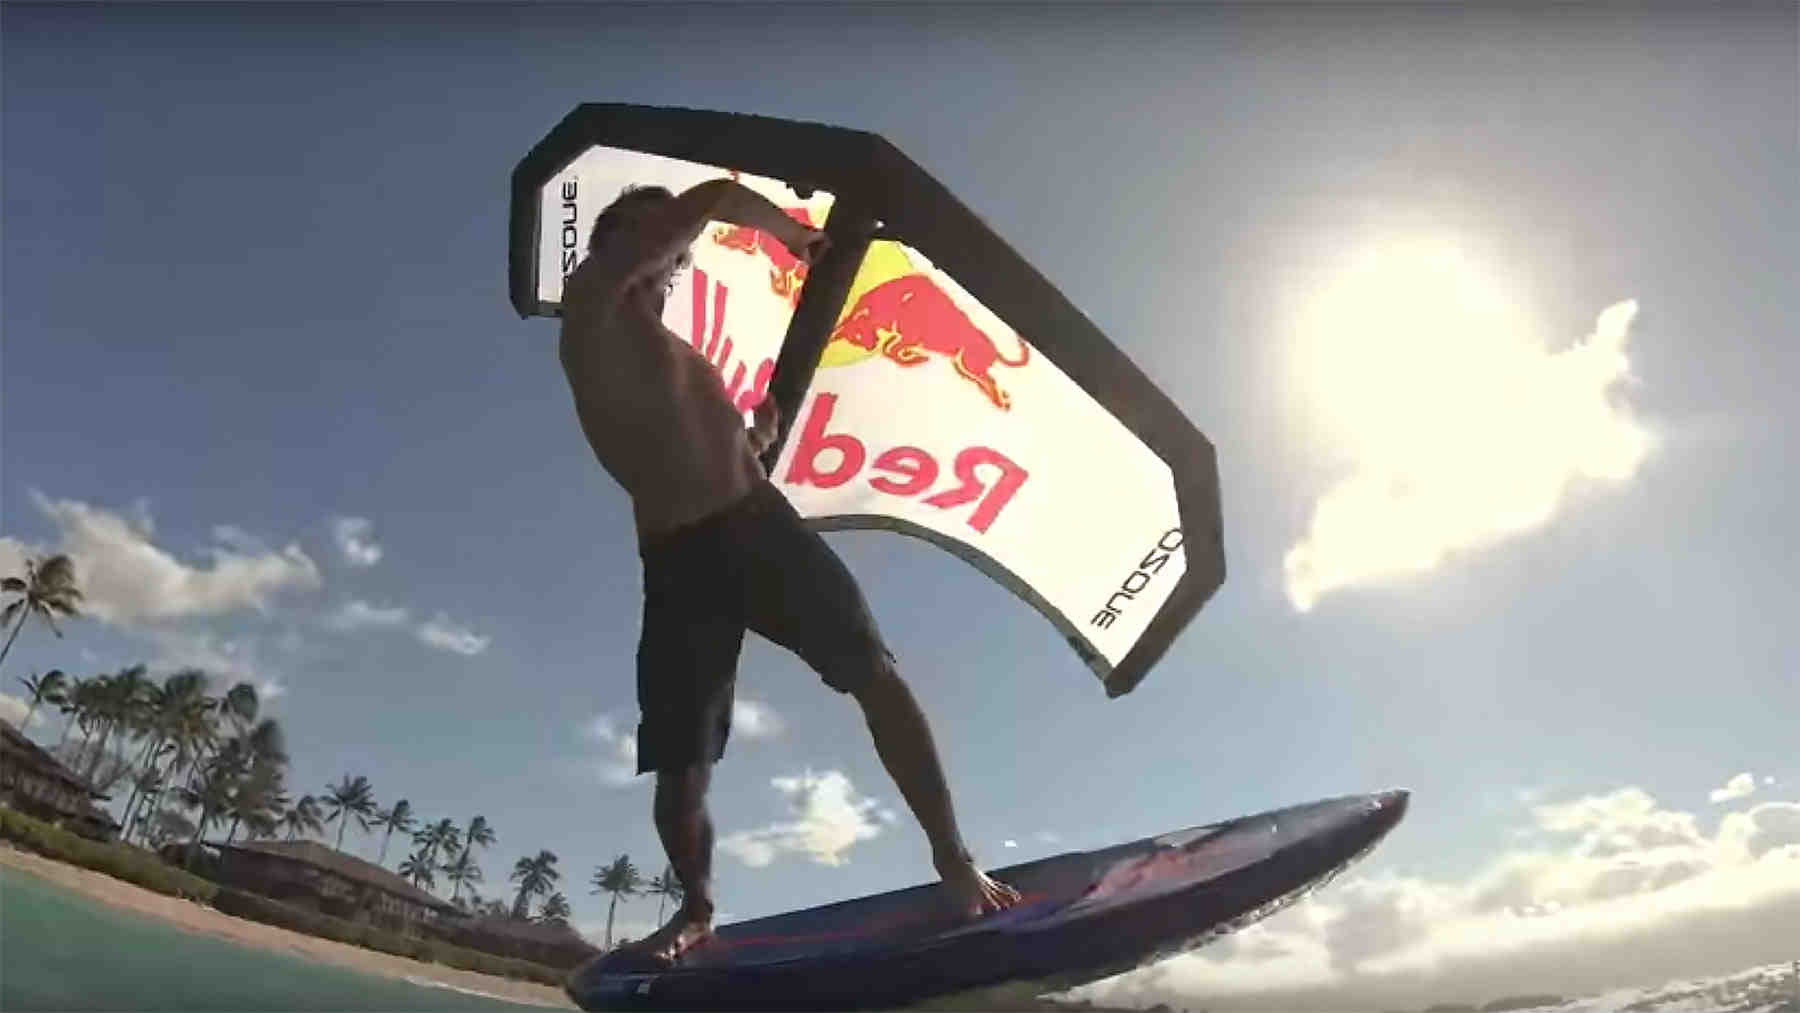 Who owns the world surf League?